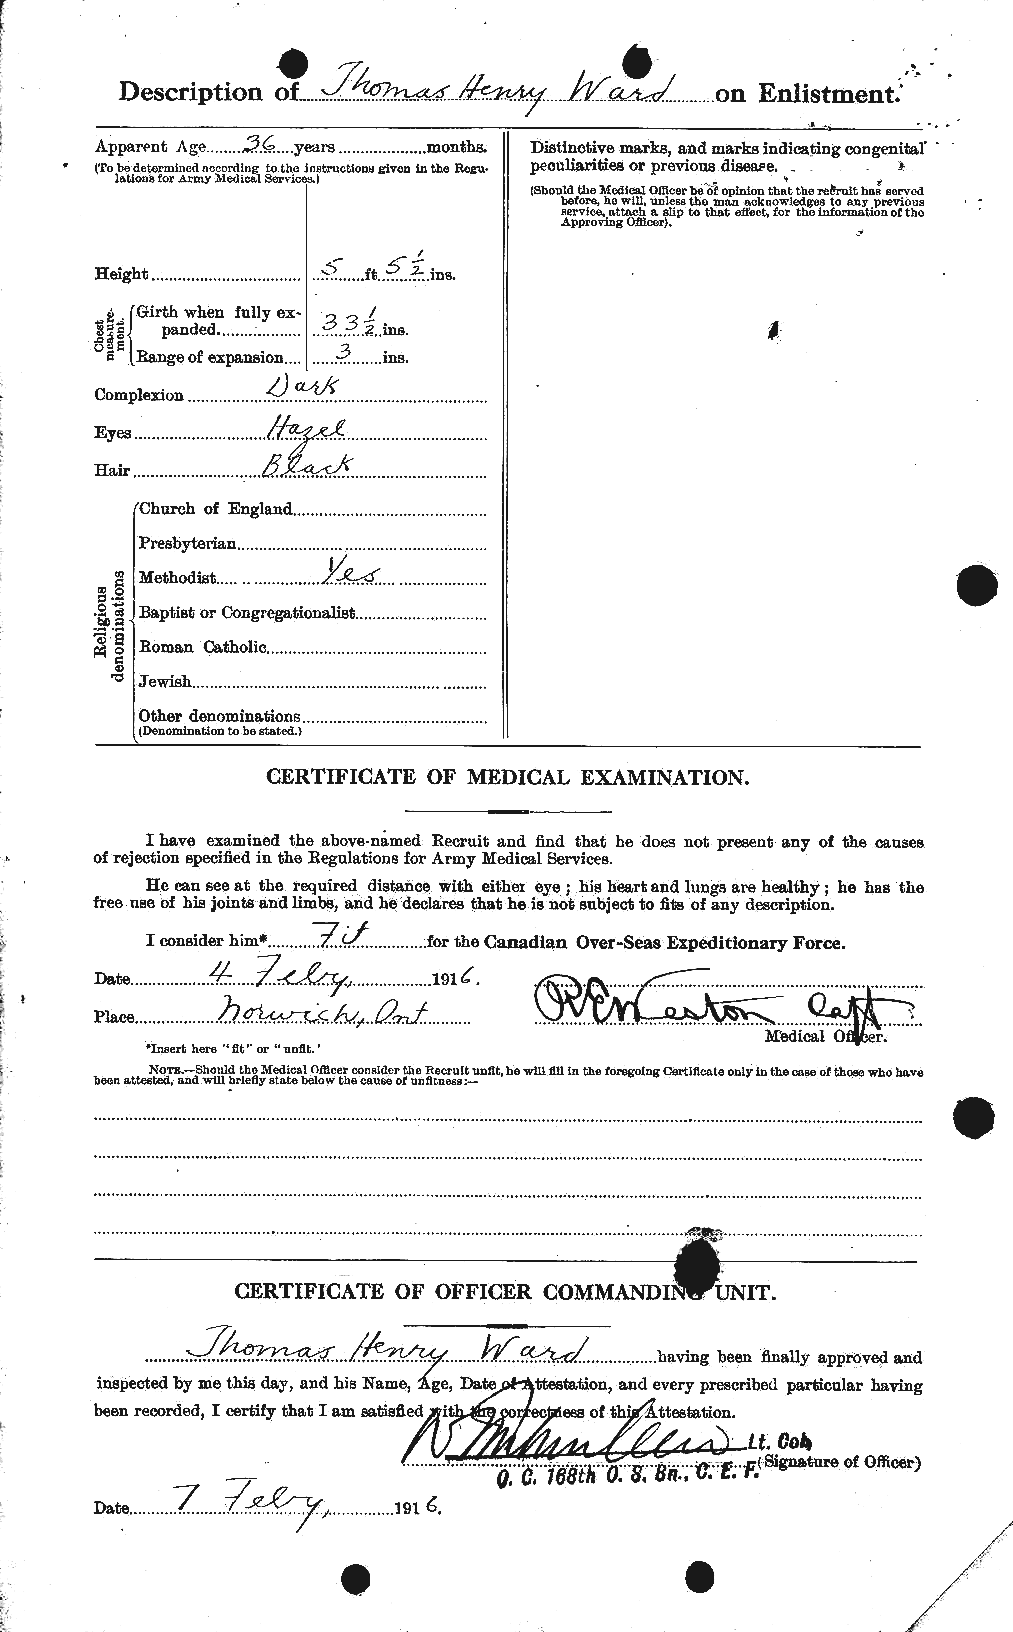 Personnel Records of the First World War - CEF 659728b